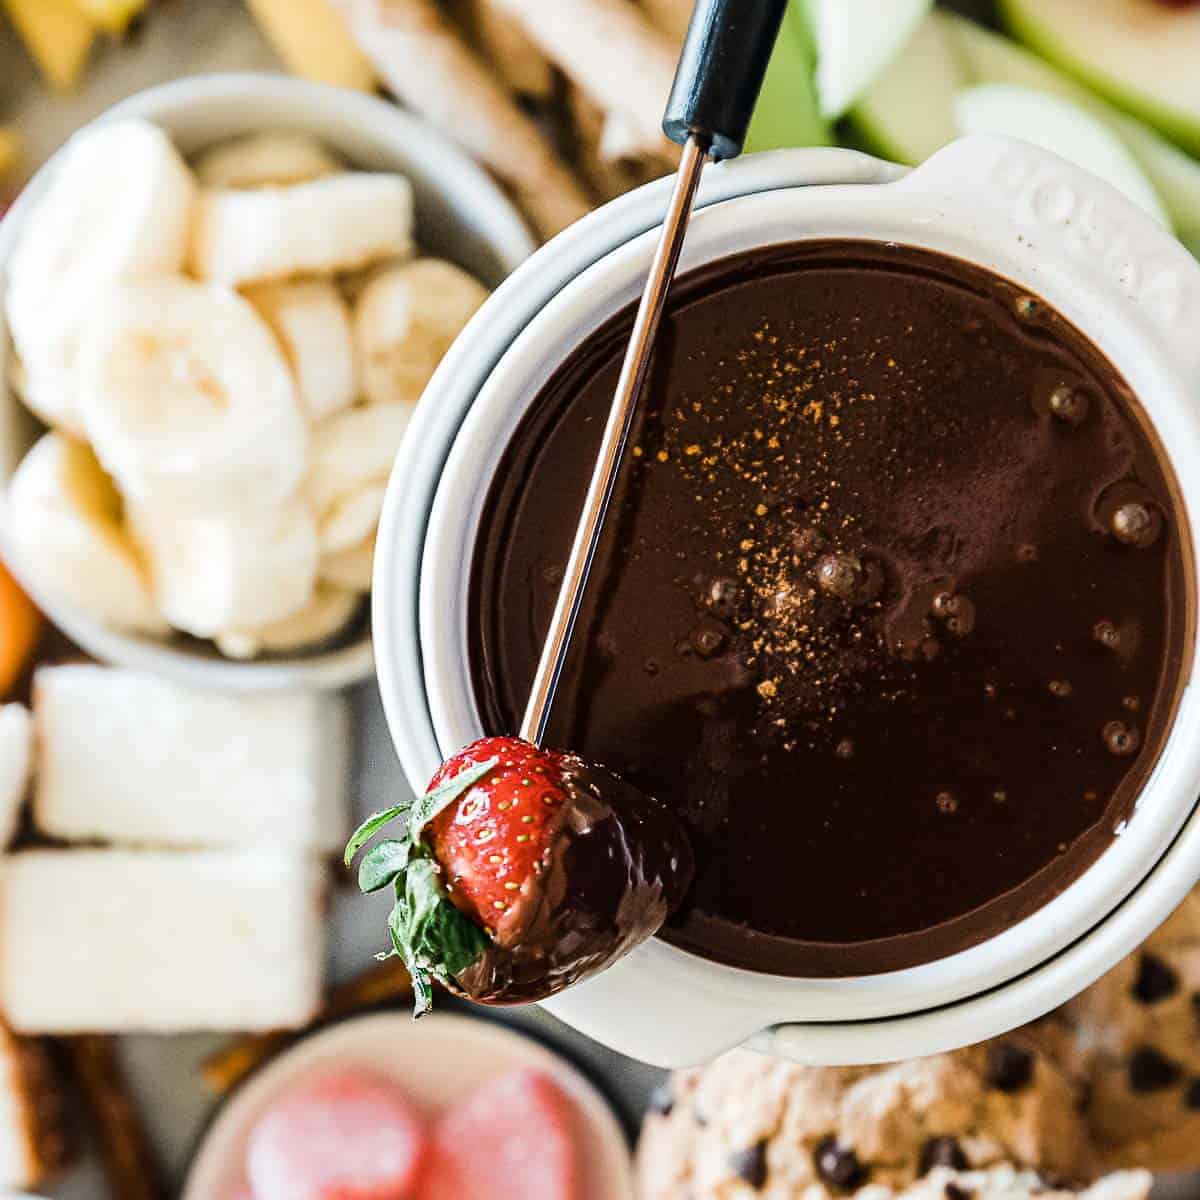 Chocolate Fondue Electric Stainless Steel Fondue Pot Chocolate Melting Machine Dipping Dessert Fruits Butter Cheese for Party Wedding Hotel Chocolate Fondue Pot 